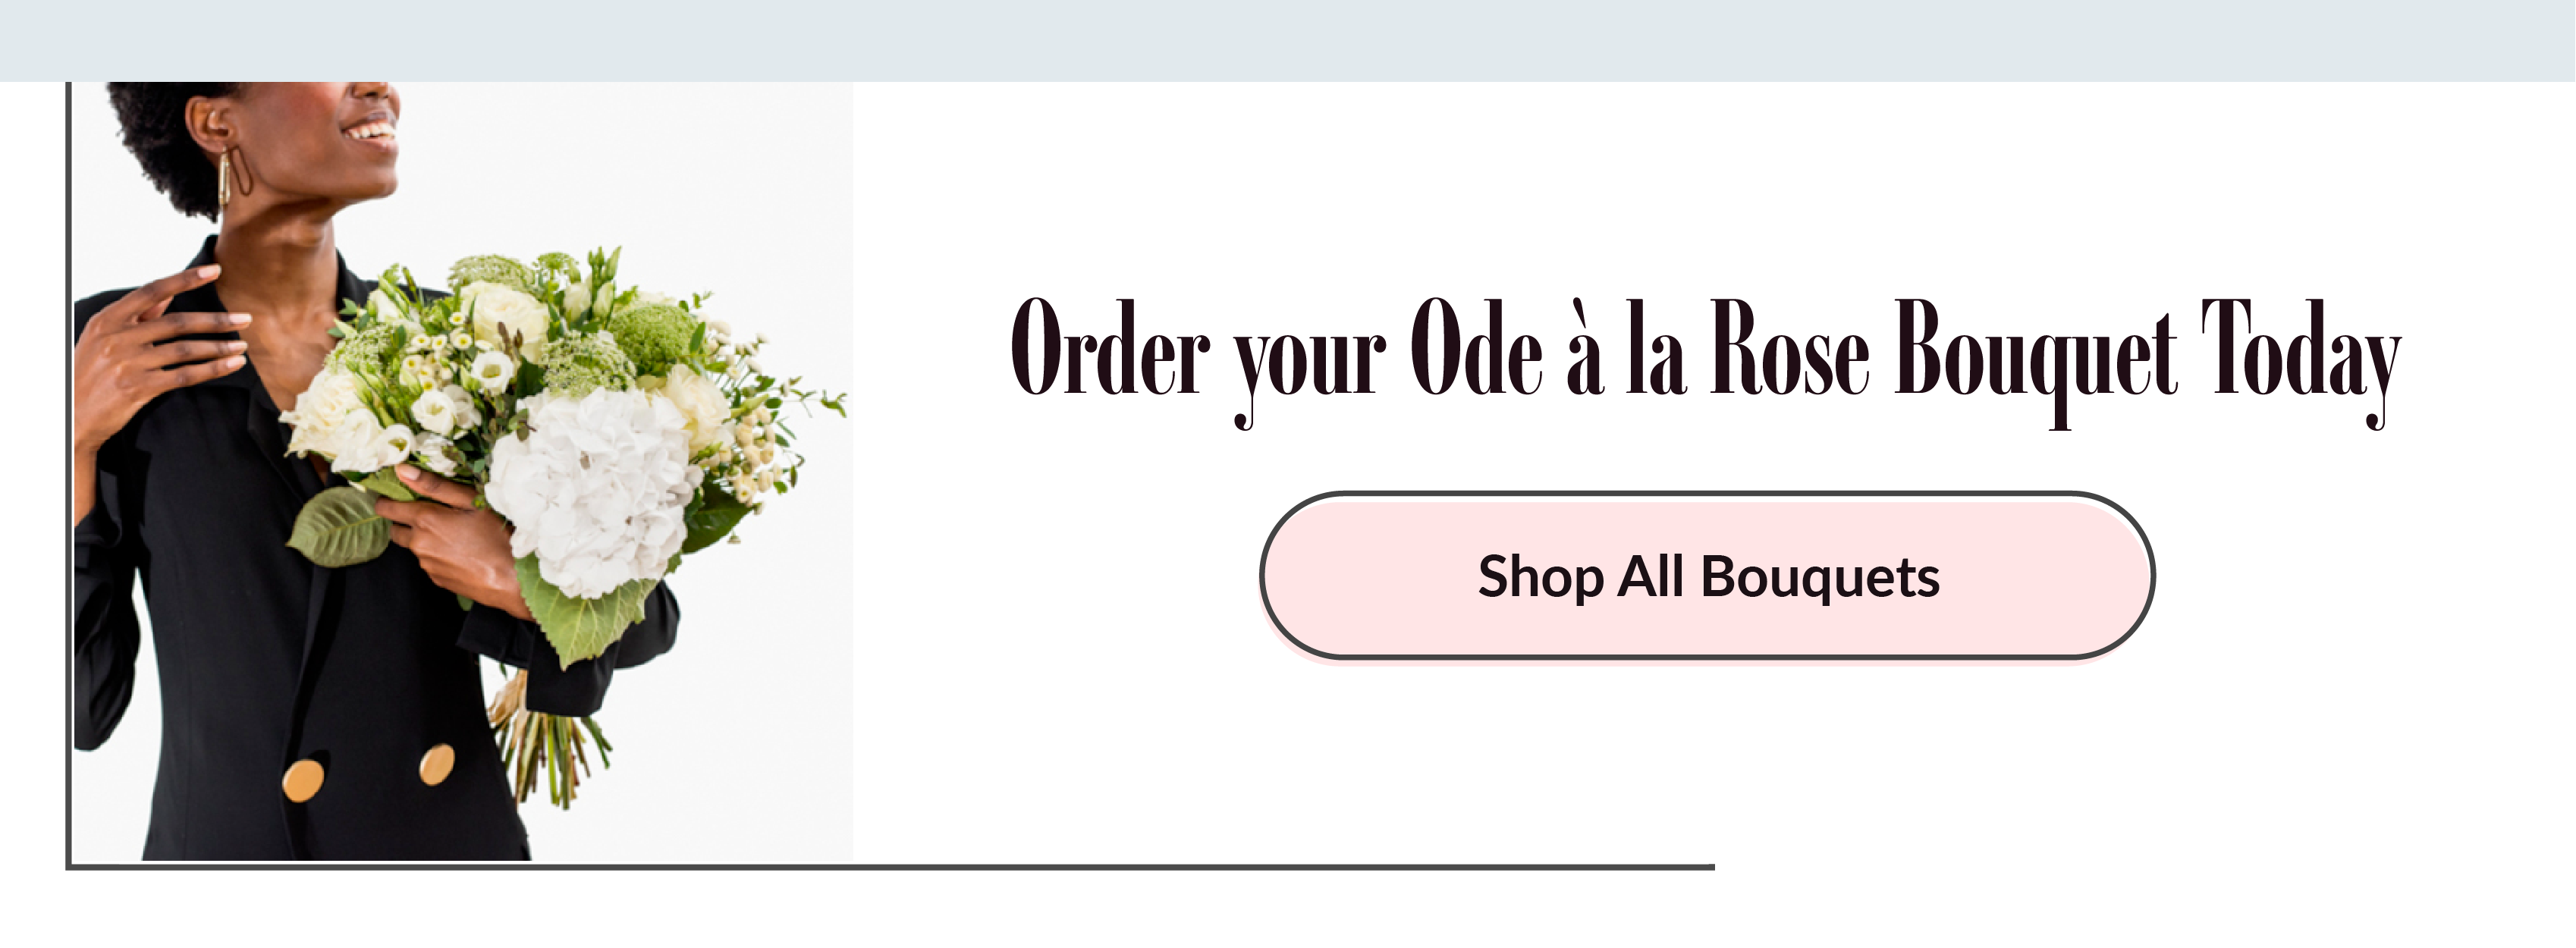 Order Ode a La Rose Flowers today